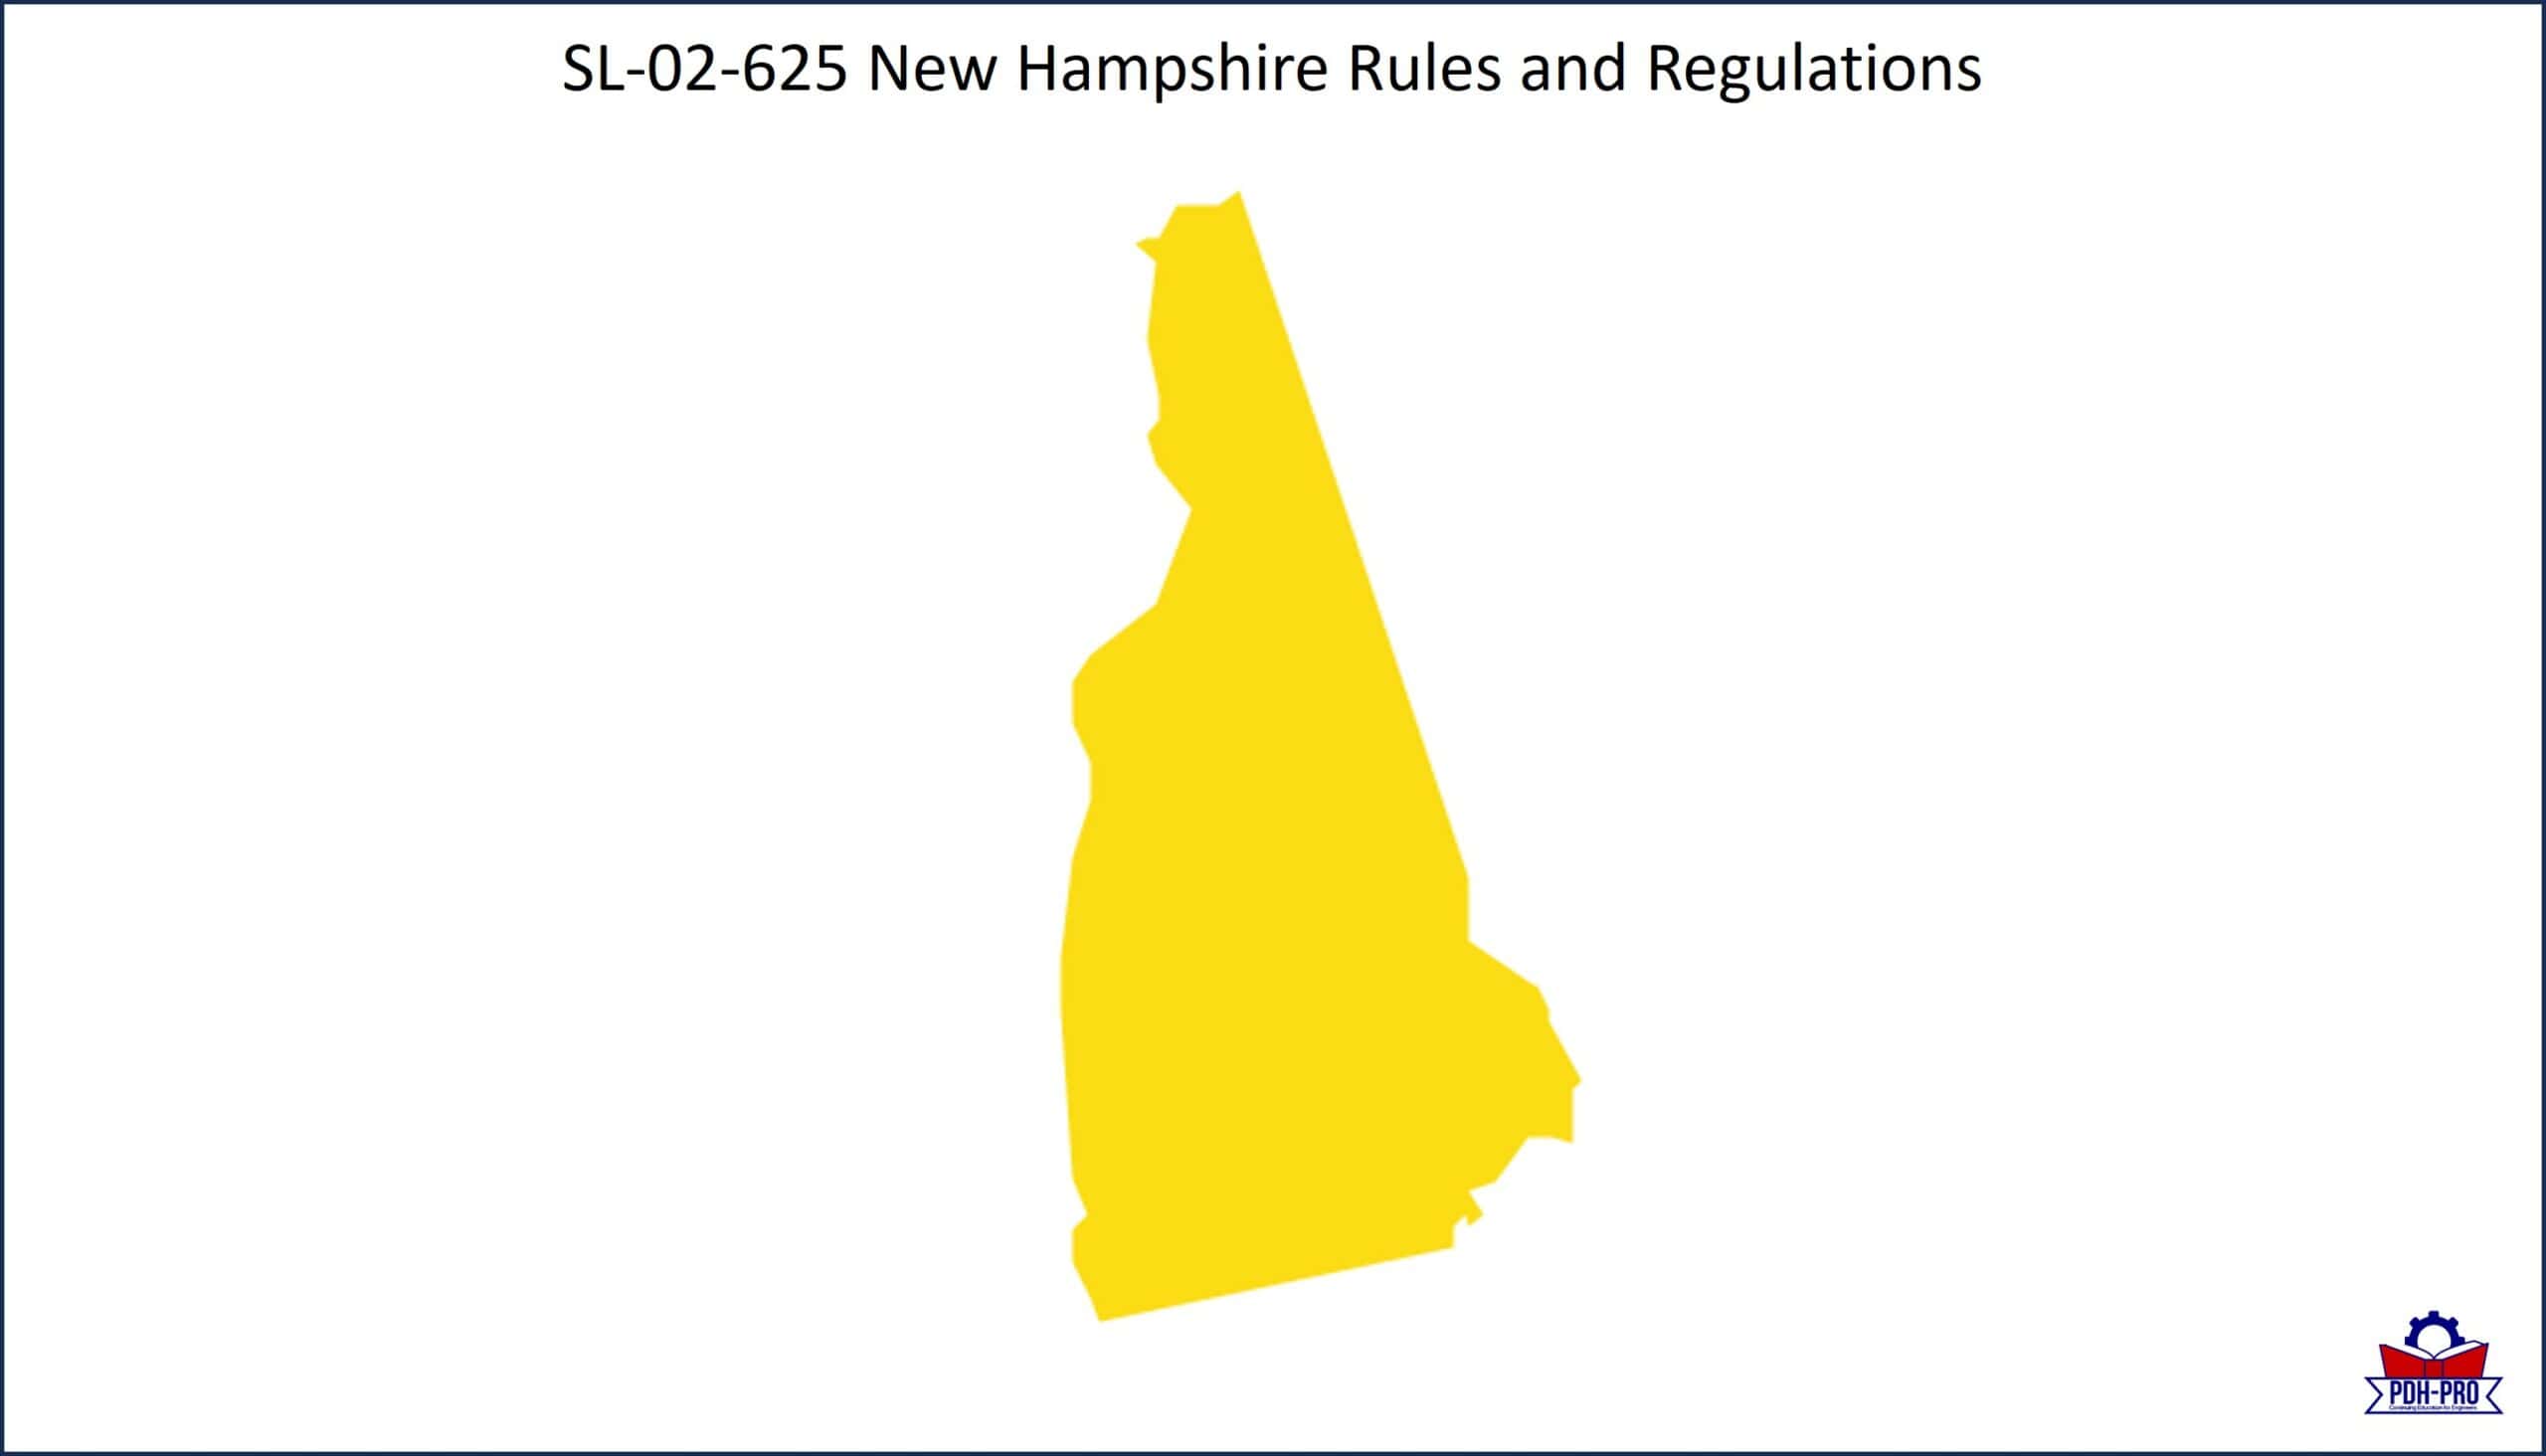 New Hampshire Rules and Regulations